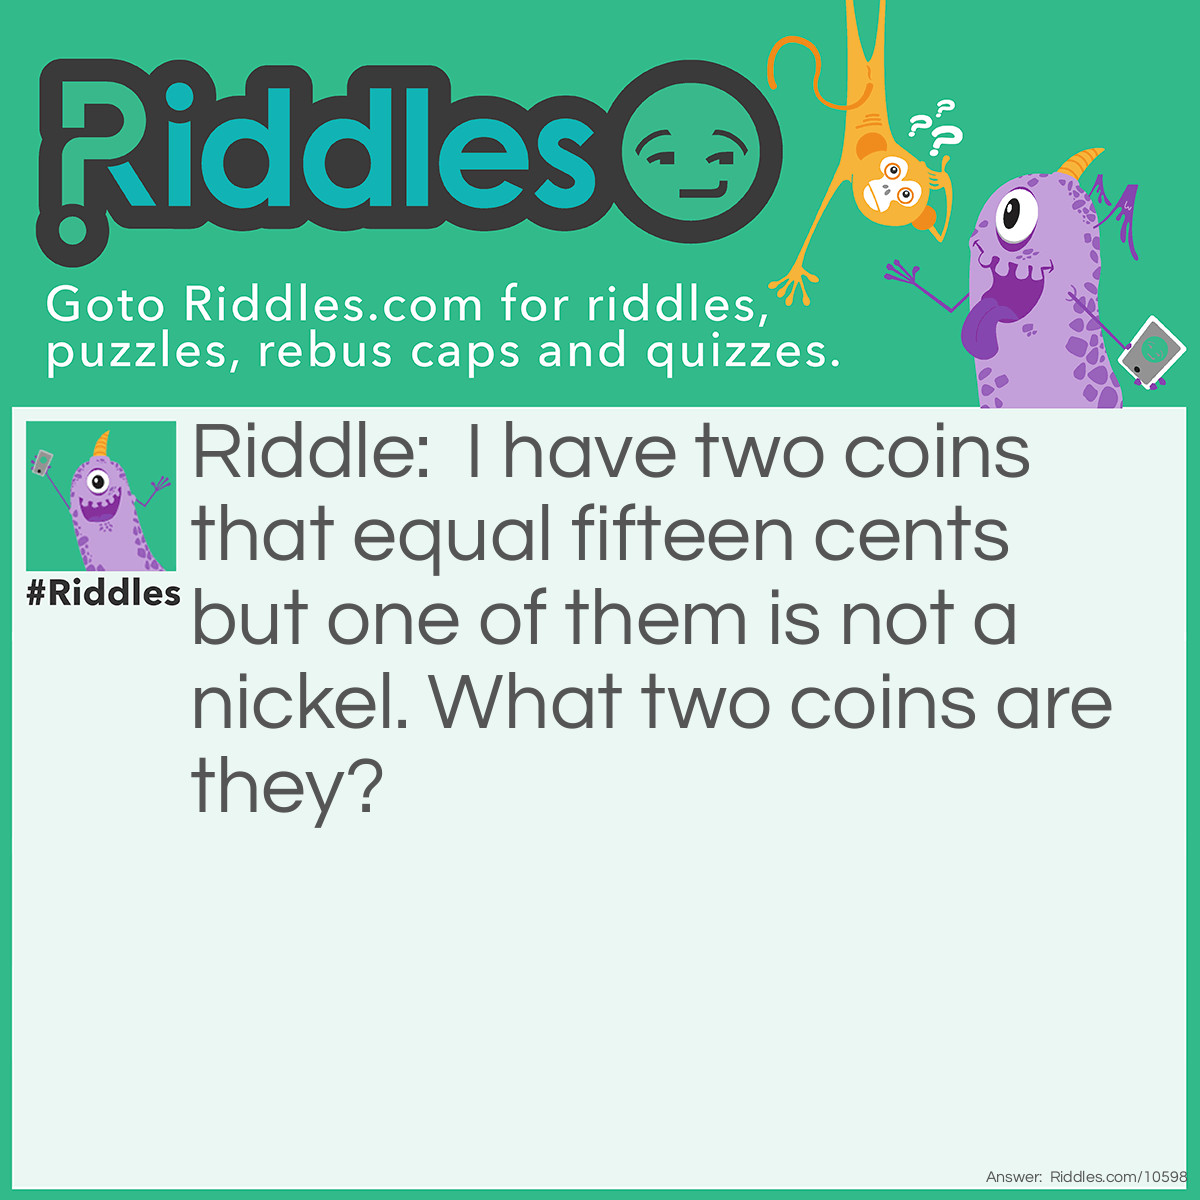 Riddle: I have two coins that equal fifteen cents but one of them is not a nickel. What two coins are they? Answer: A dime and a nickel because one of them is not a nickel but the other one is.